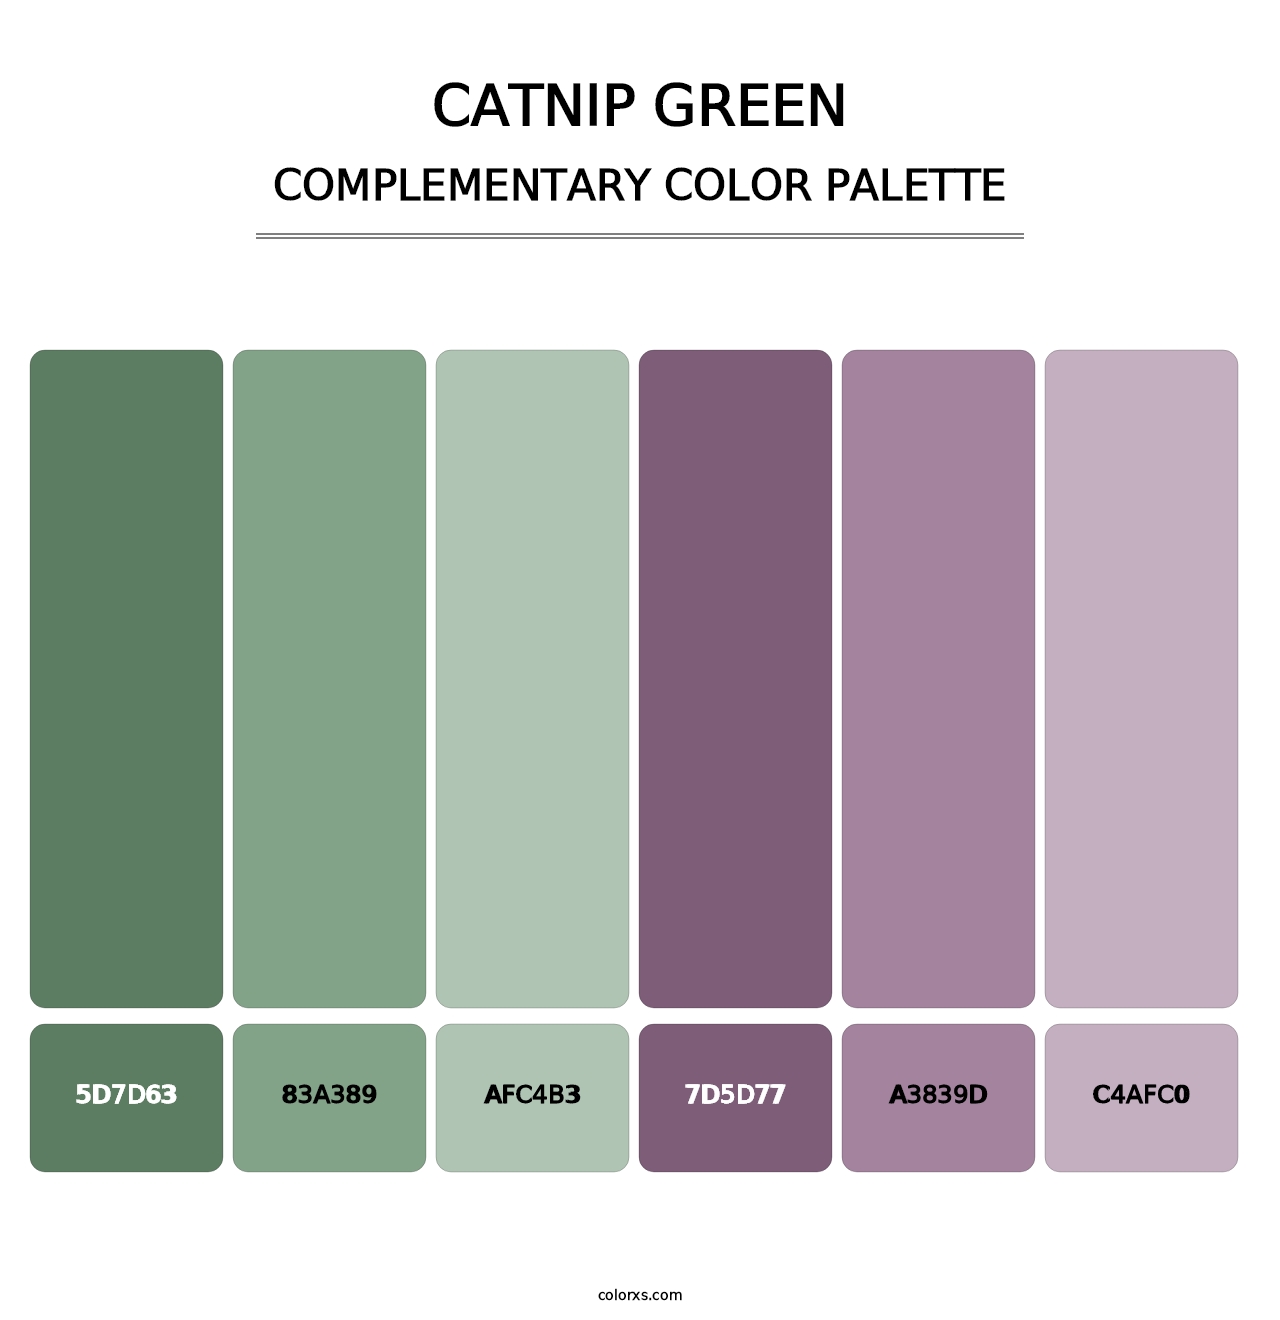 Catnip Green - Complementary Color Palette